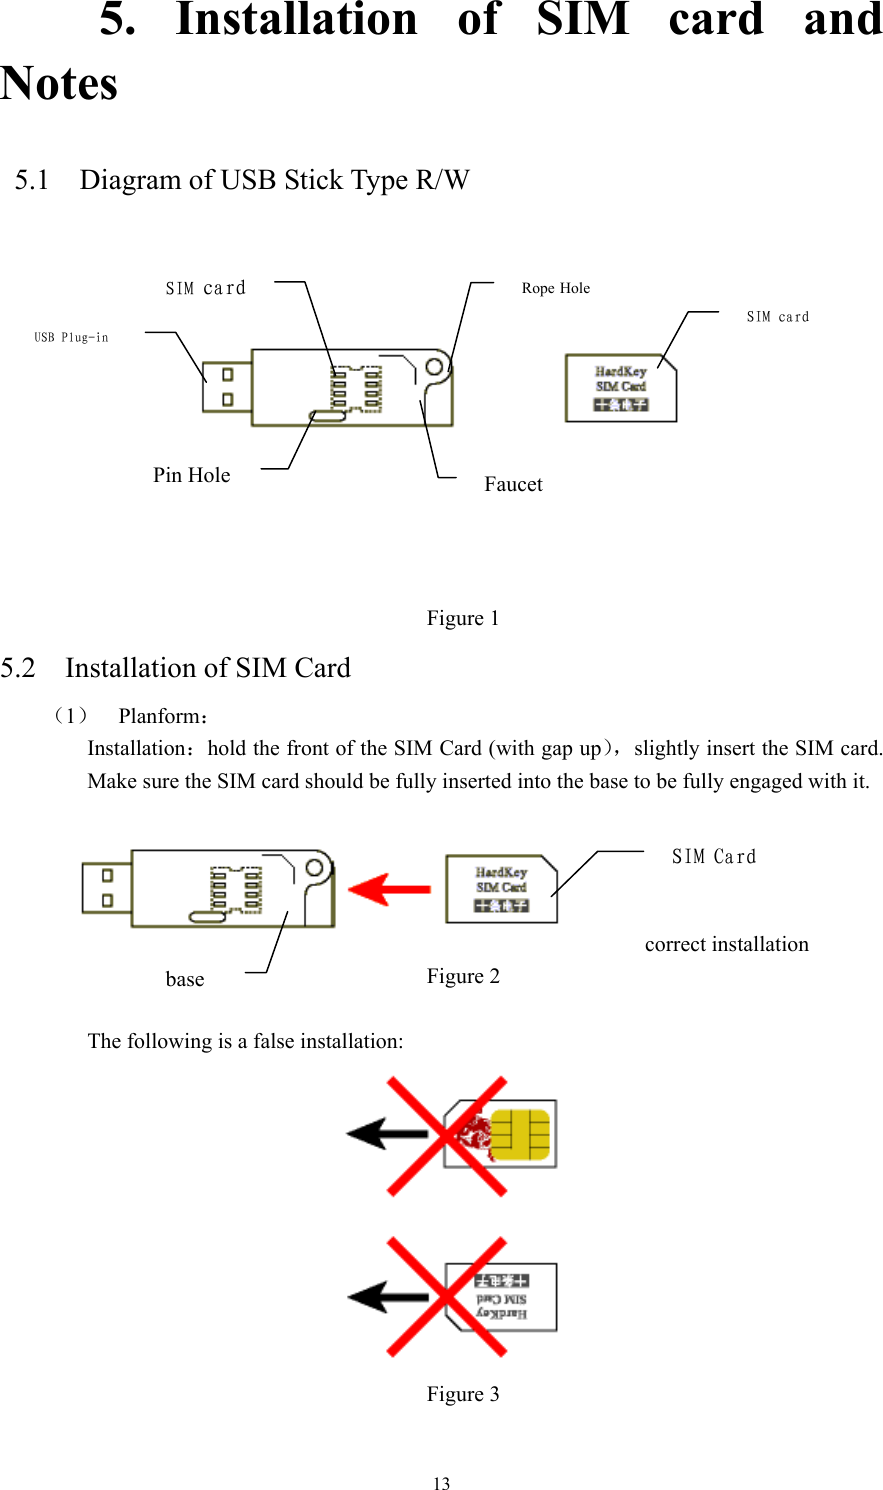  135. Installation of SIM card and Notes    5.1    Diagram of USB Stick Type R/W  Figure 1 5.2    Installation of SIM Card （1）  Planform： Installation：hold the front of the SIM Card (with gap up），slightly insert the SIM card. Make sure the SIM card should be fully inserted into the base to be fully engaged with it.    correct installation Figure 2      The following is a false installation: Figure 3   SIM cardRope HoleFaucet SIM card Pin Hole USB Plug-in baseSIMCard